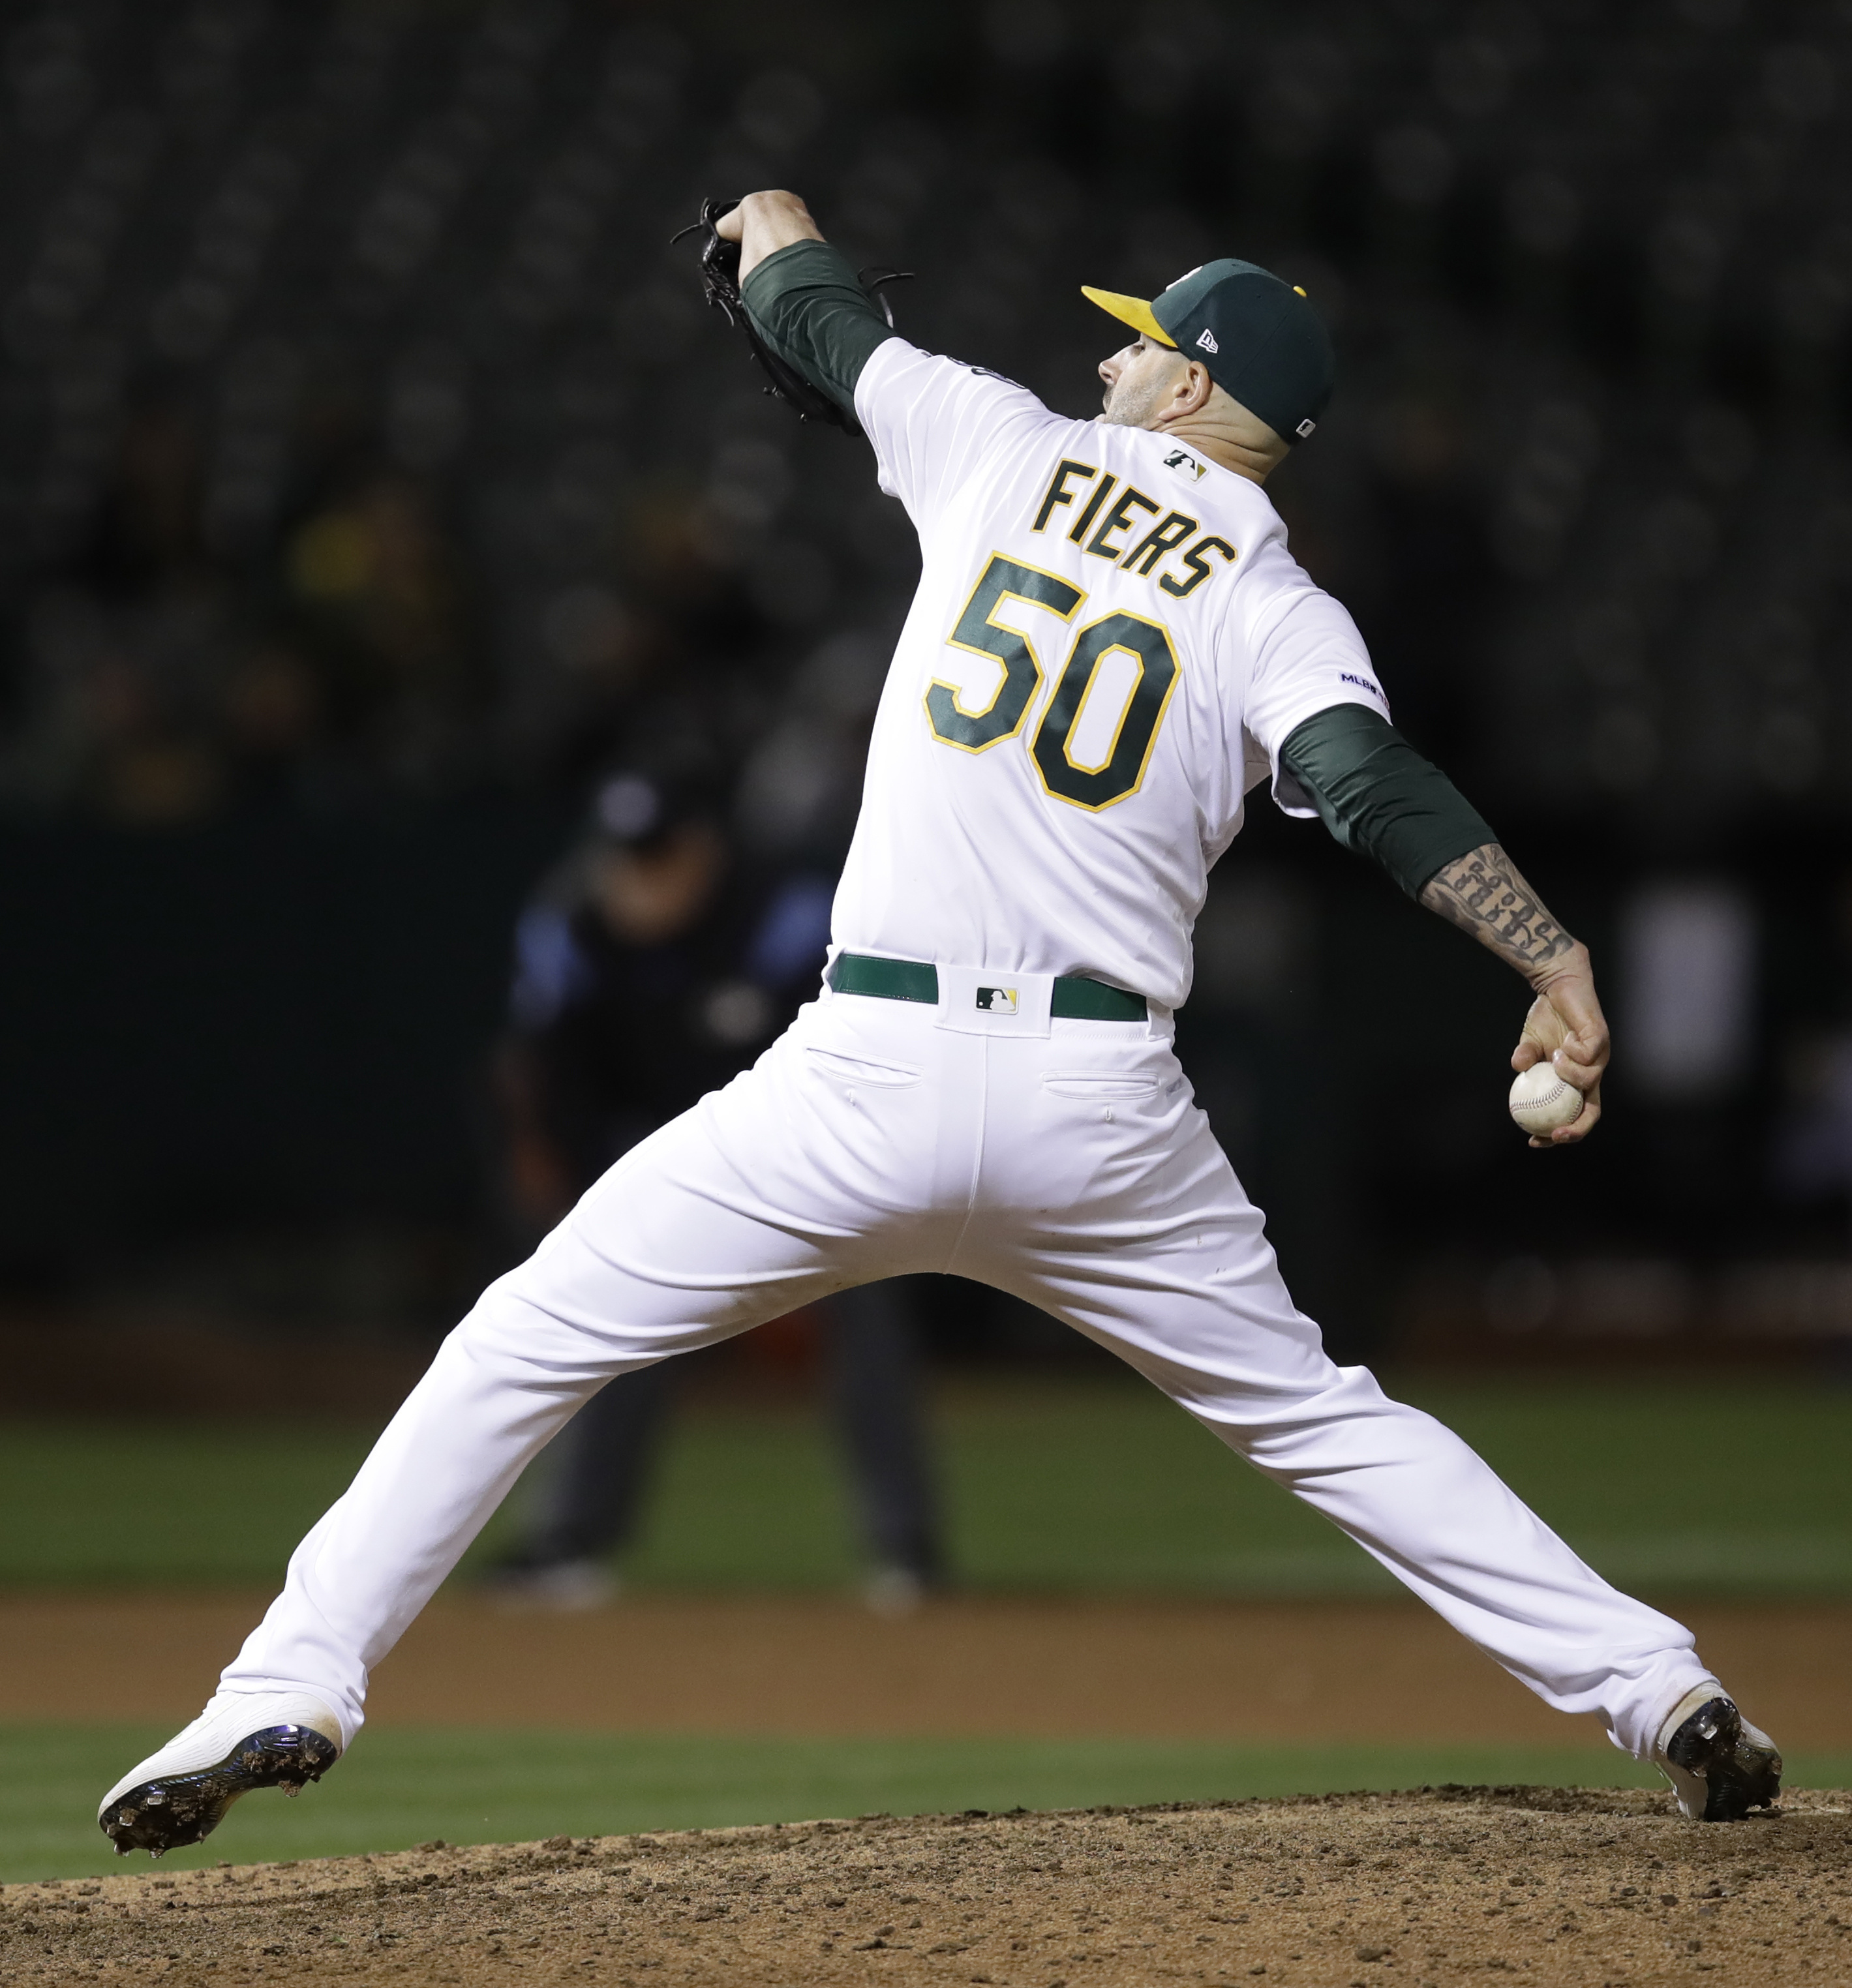 Oakland's Fiers joins exclusive list with 2nd no-hitter